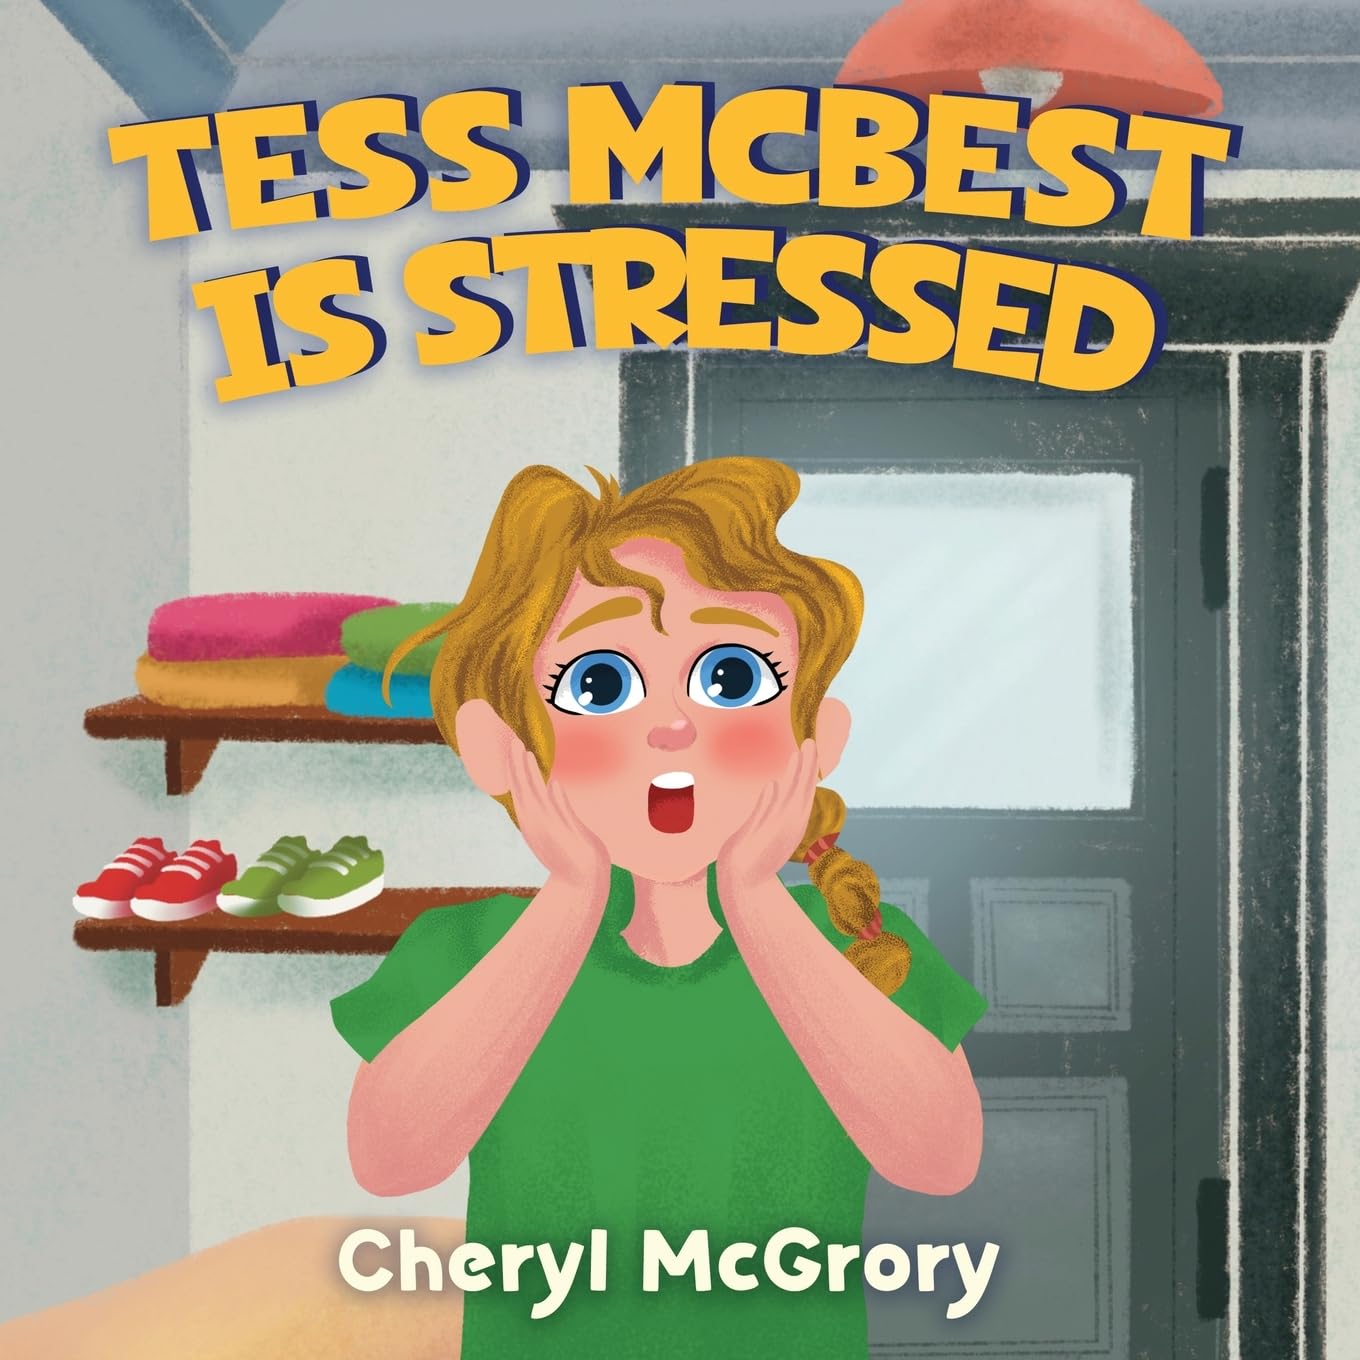 New children’s book "Tess McBest is Stressed!" by Cheryl McGrory is released, a delightful rhyming story about a young girl learning to ask for help in a stressful situation